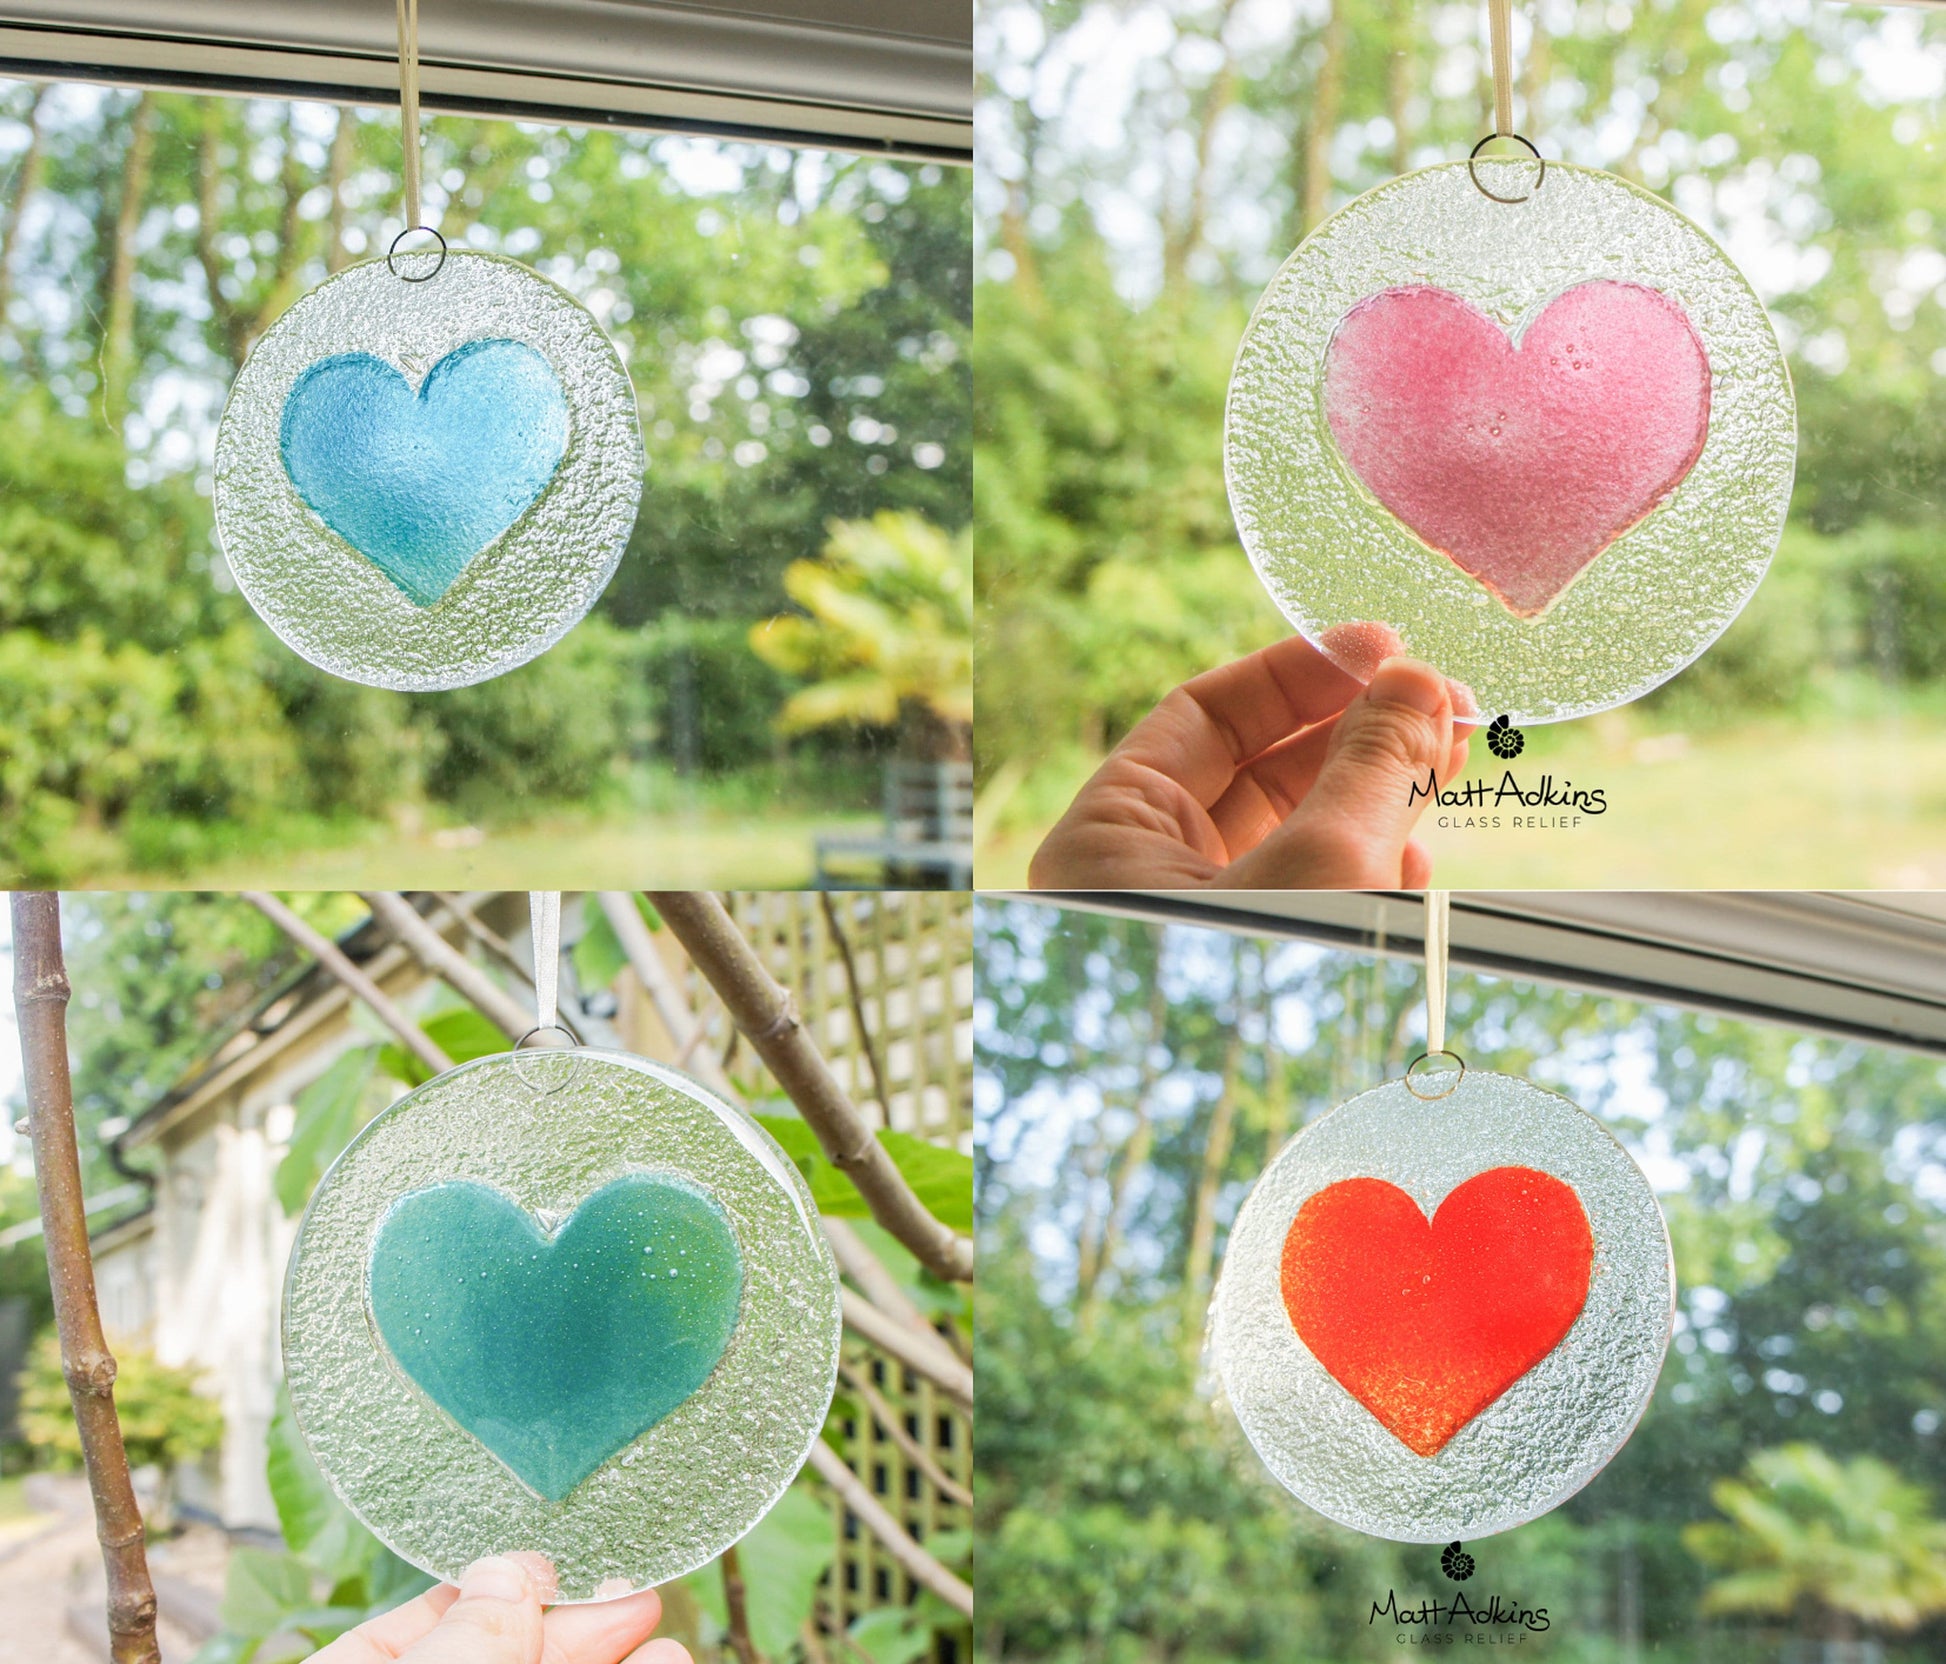 Red Heart Glass Suncatcher 12cm(5"), hanging ornament, fused glass, outdoor decor, garden decoration, gift for couple, sea glass art